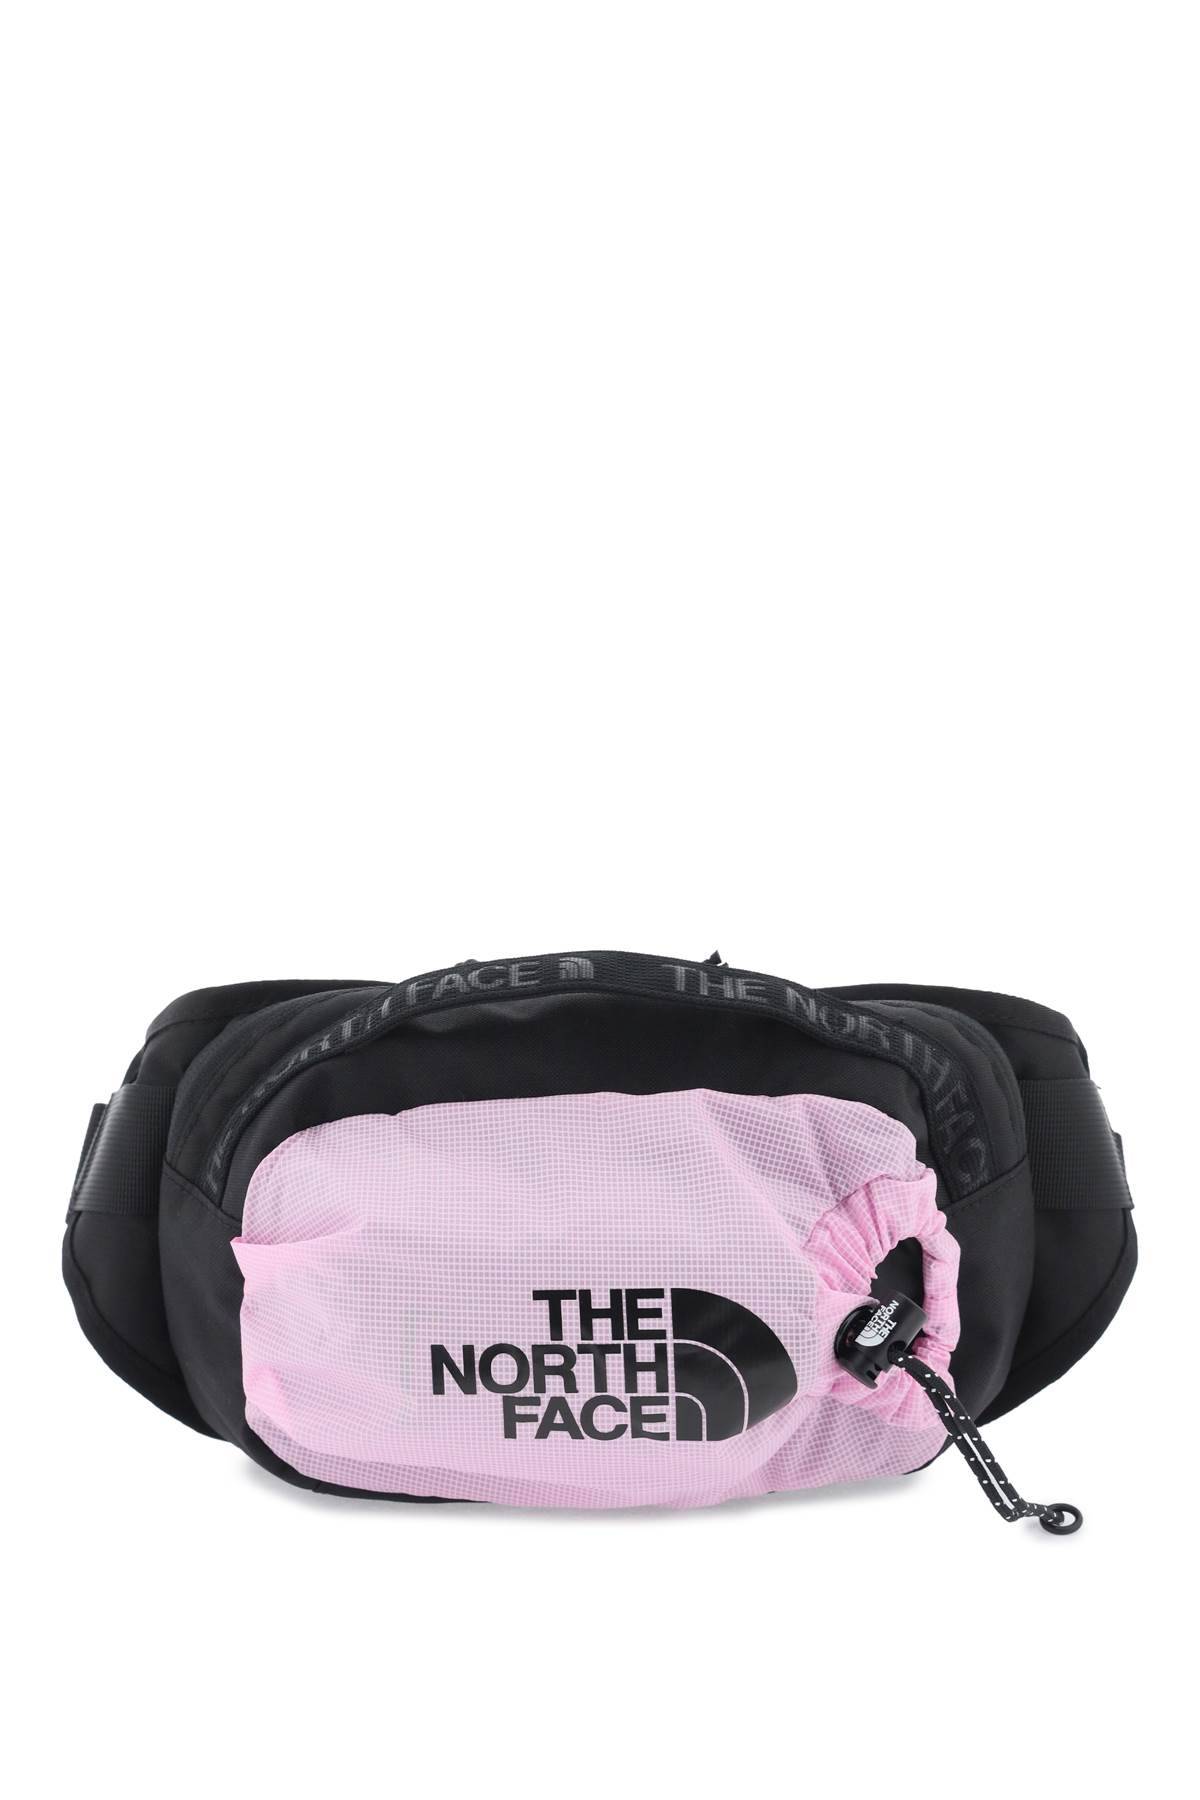 The North Face Bozer Iii - L Beltpack In Black,pink